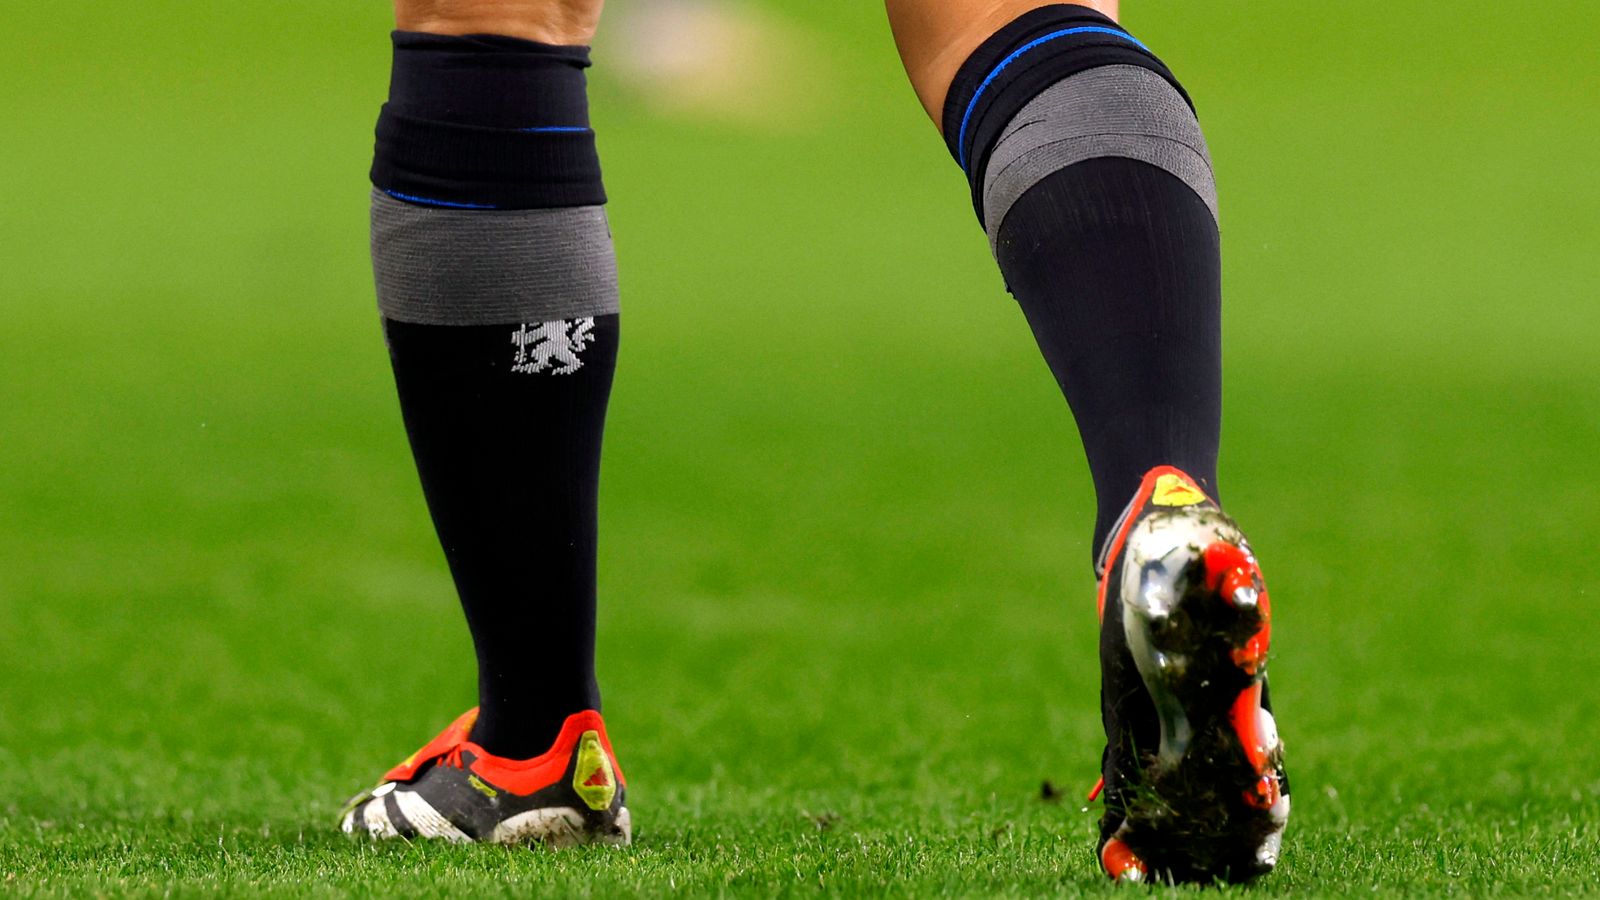 Sock problem delays Chelsea v Arsenal WSL match by 30 minutes